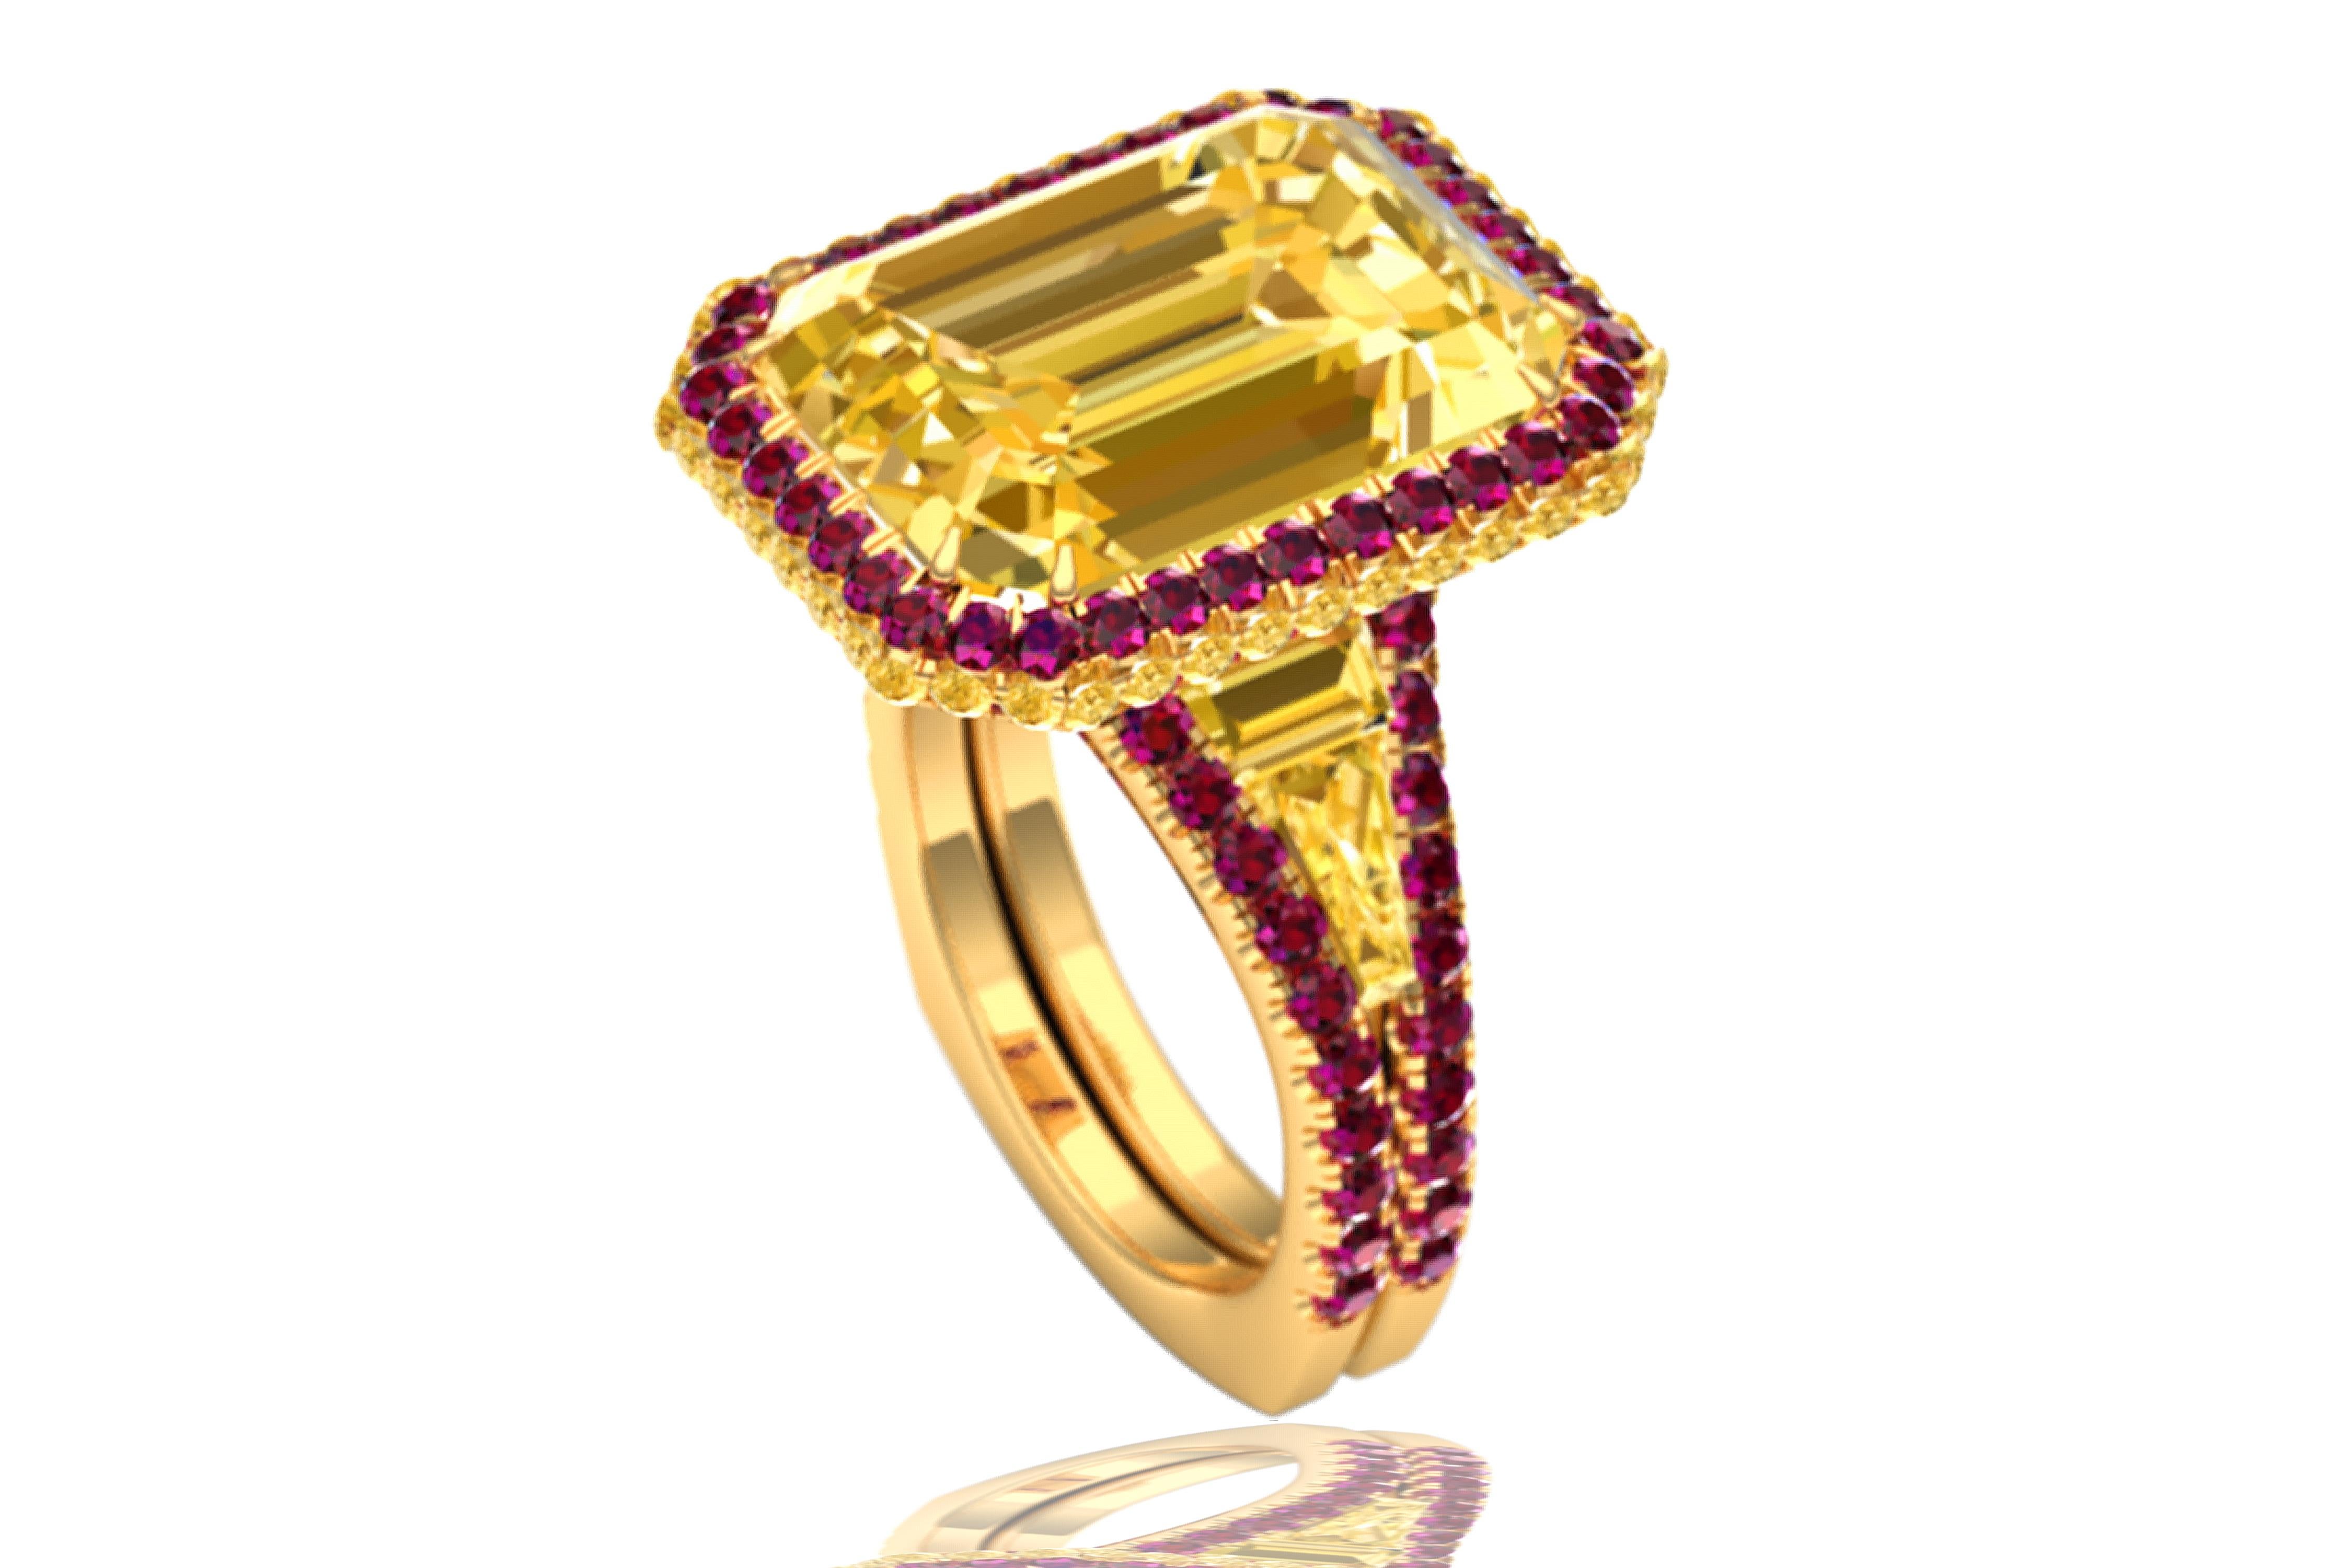 This unique and captivating ring is made up of a rare 7 carat yellow sapphire which has a gorgeous rich golden yellow color and eye clean clarity.  The center stone is complimented by .50 carats of round rich yellow diamonds that have a intense